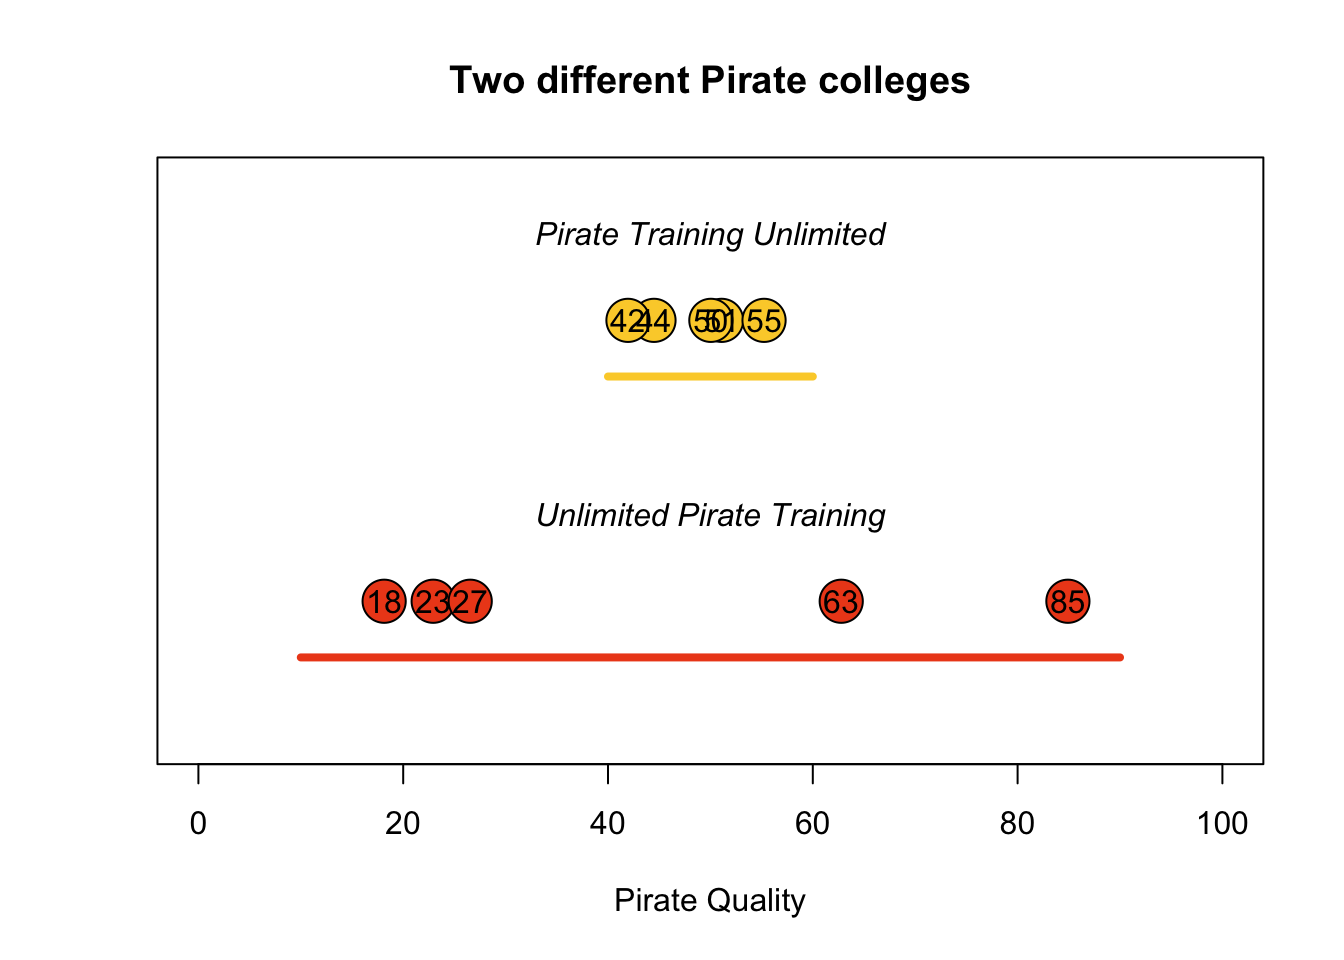 Sampling 5 potential pirates from two different pirate colleges. Pirate Training Unlimited (PTU) consistently produces average pirates (with scores between 40 and 60), while Unlimited Pirate Training (UPT), produces a wide range of pirates from 0 to 100.